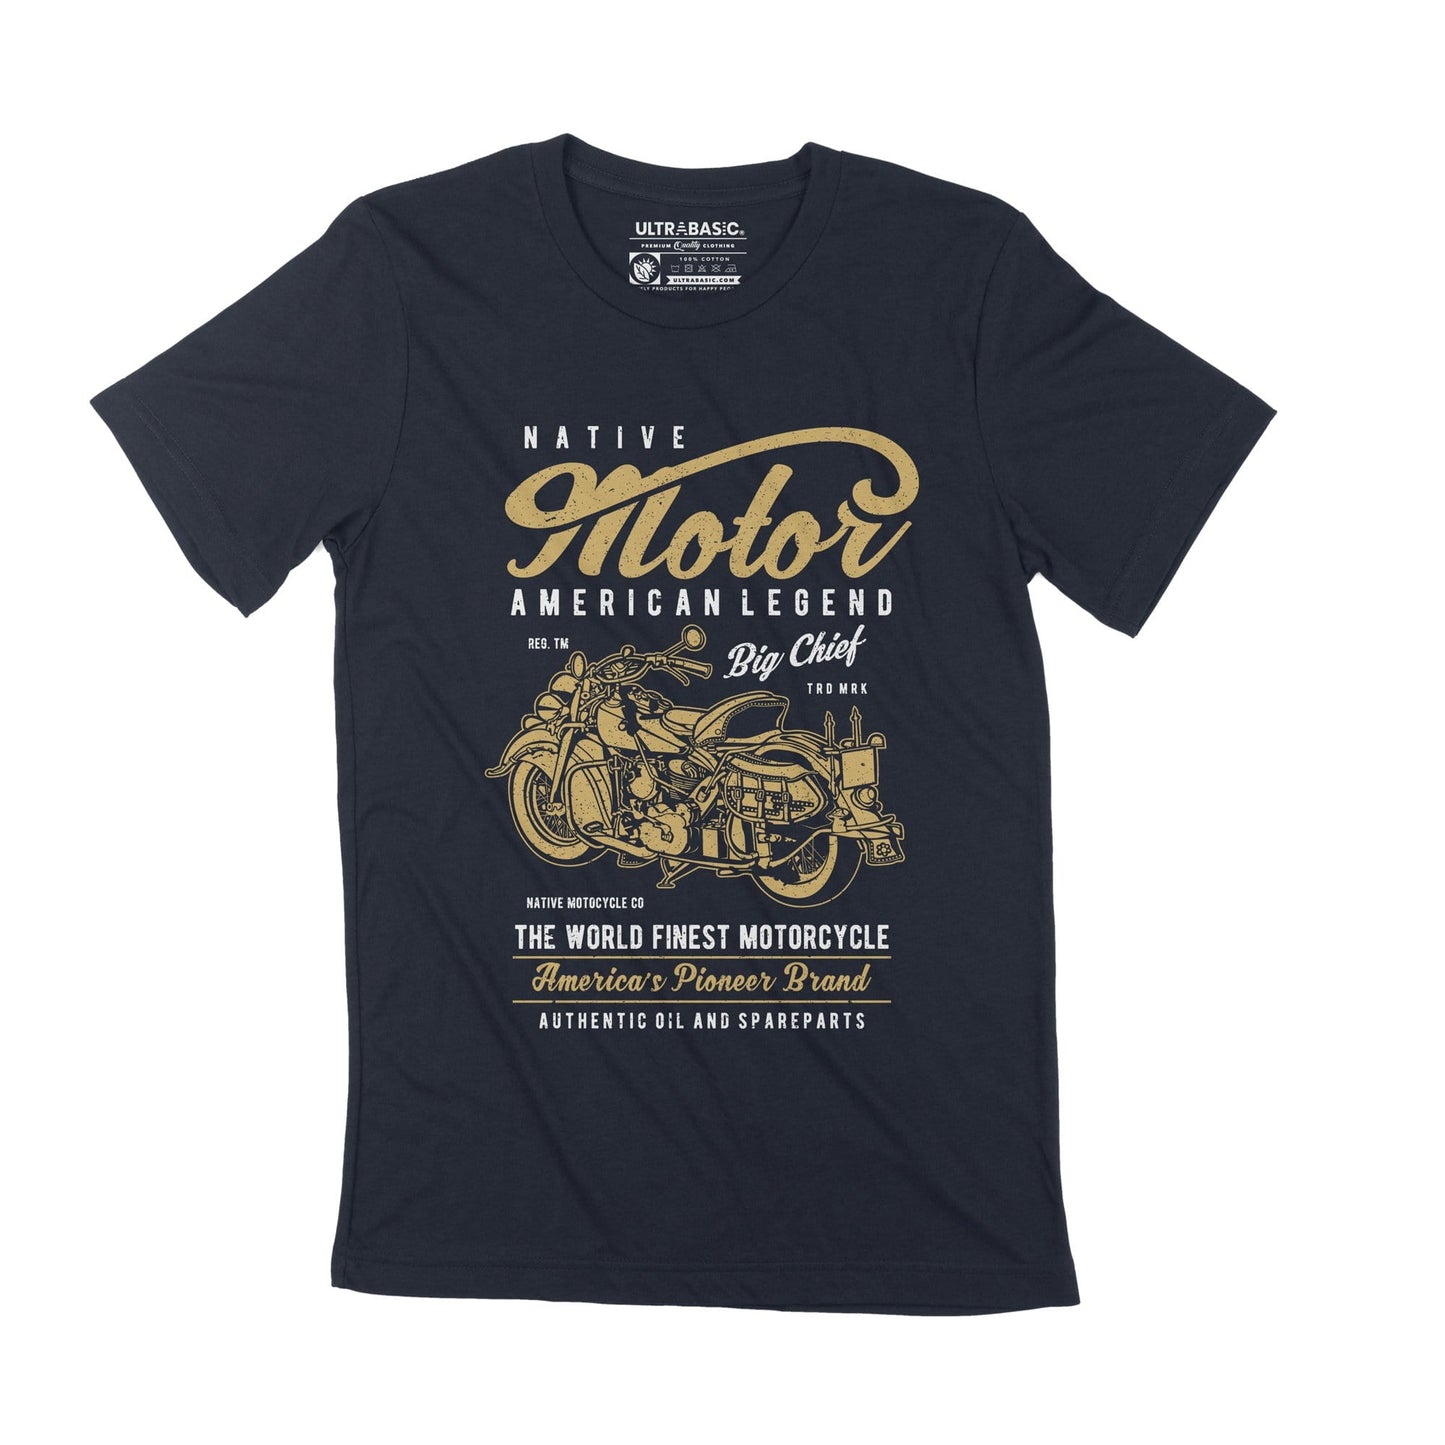 ULTRABASIC Vintage Motorcycle T-Shirt for Men - Native Motor American Legend clothing men outdoor oldtimer shirts mechanic victory outfits usa guy apparel road live simply tees unisex tshirts rock motor genuine live motorbike cafe racer indian motorcycles dad bikers patches fast driving casual merchandise garage